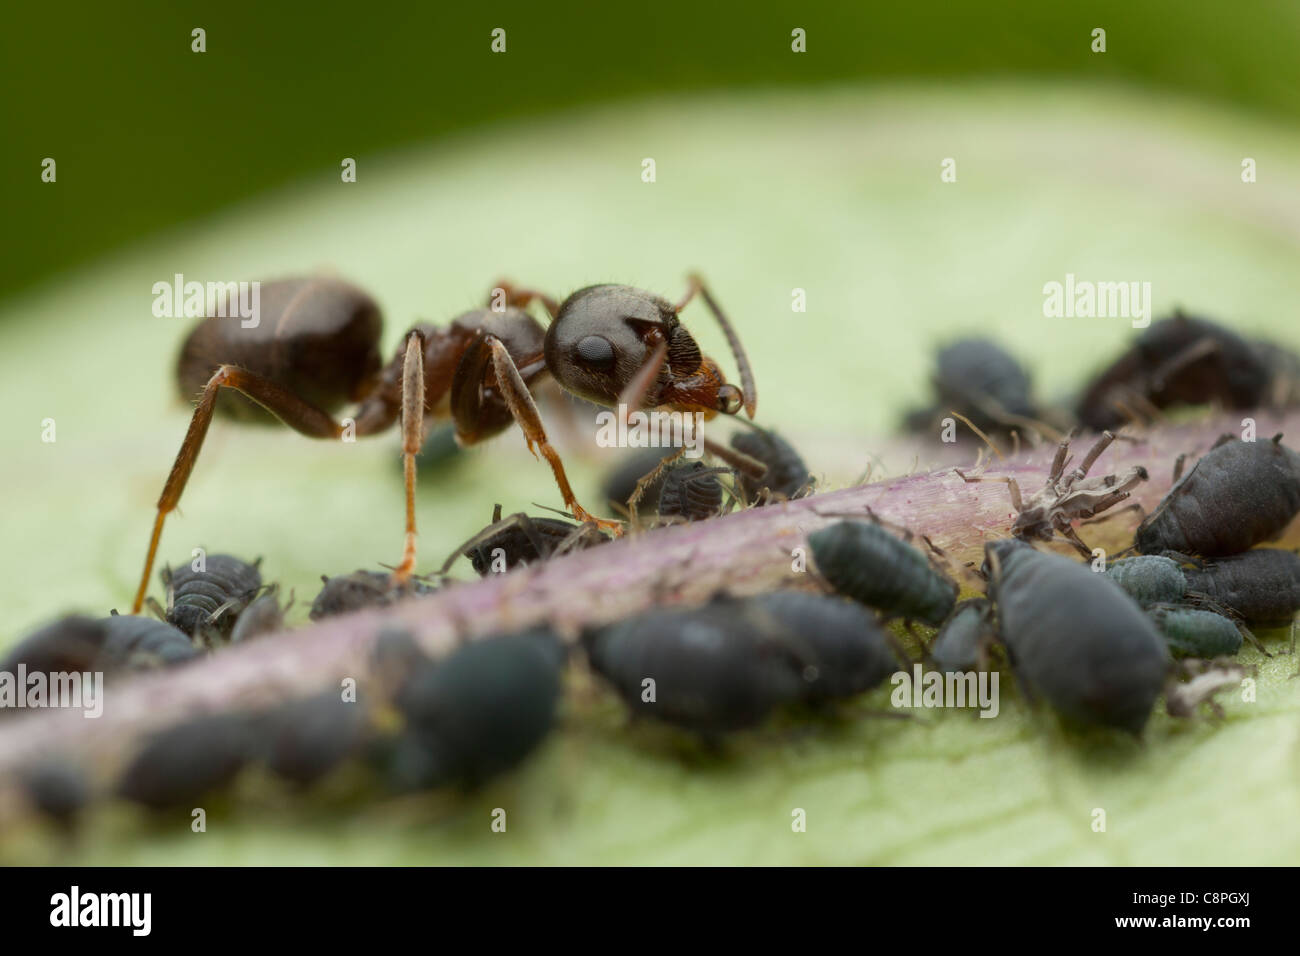 black garden ant drinks honey dew excreted by black aphids in a Hampshire garden Stock Photo